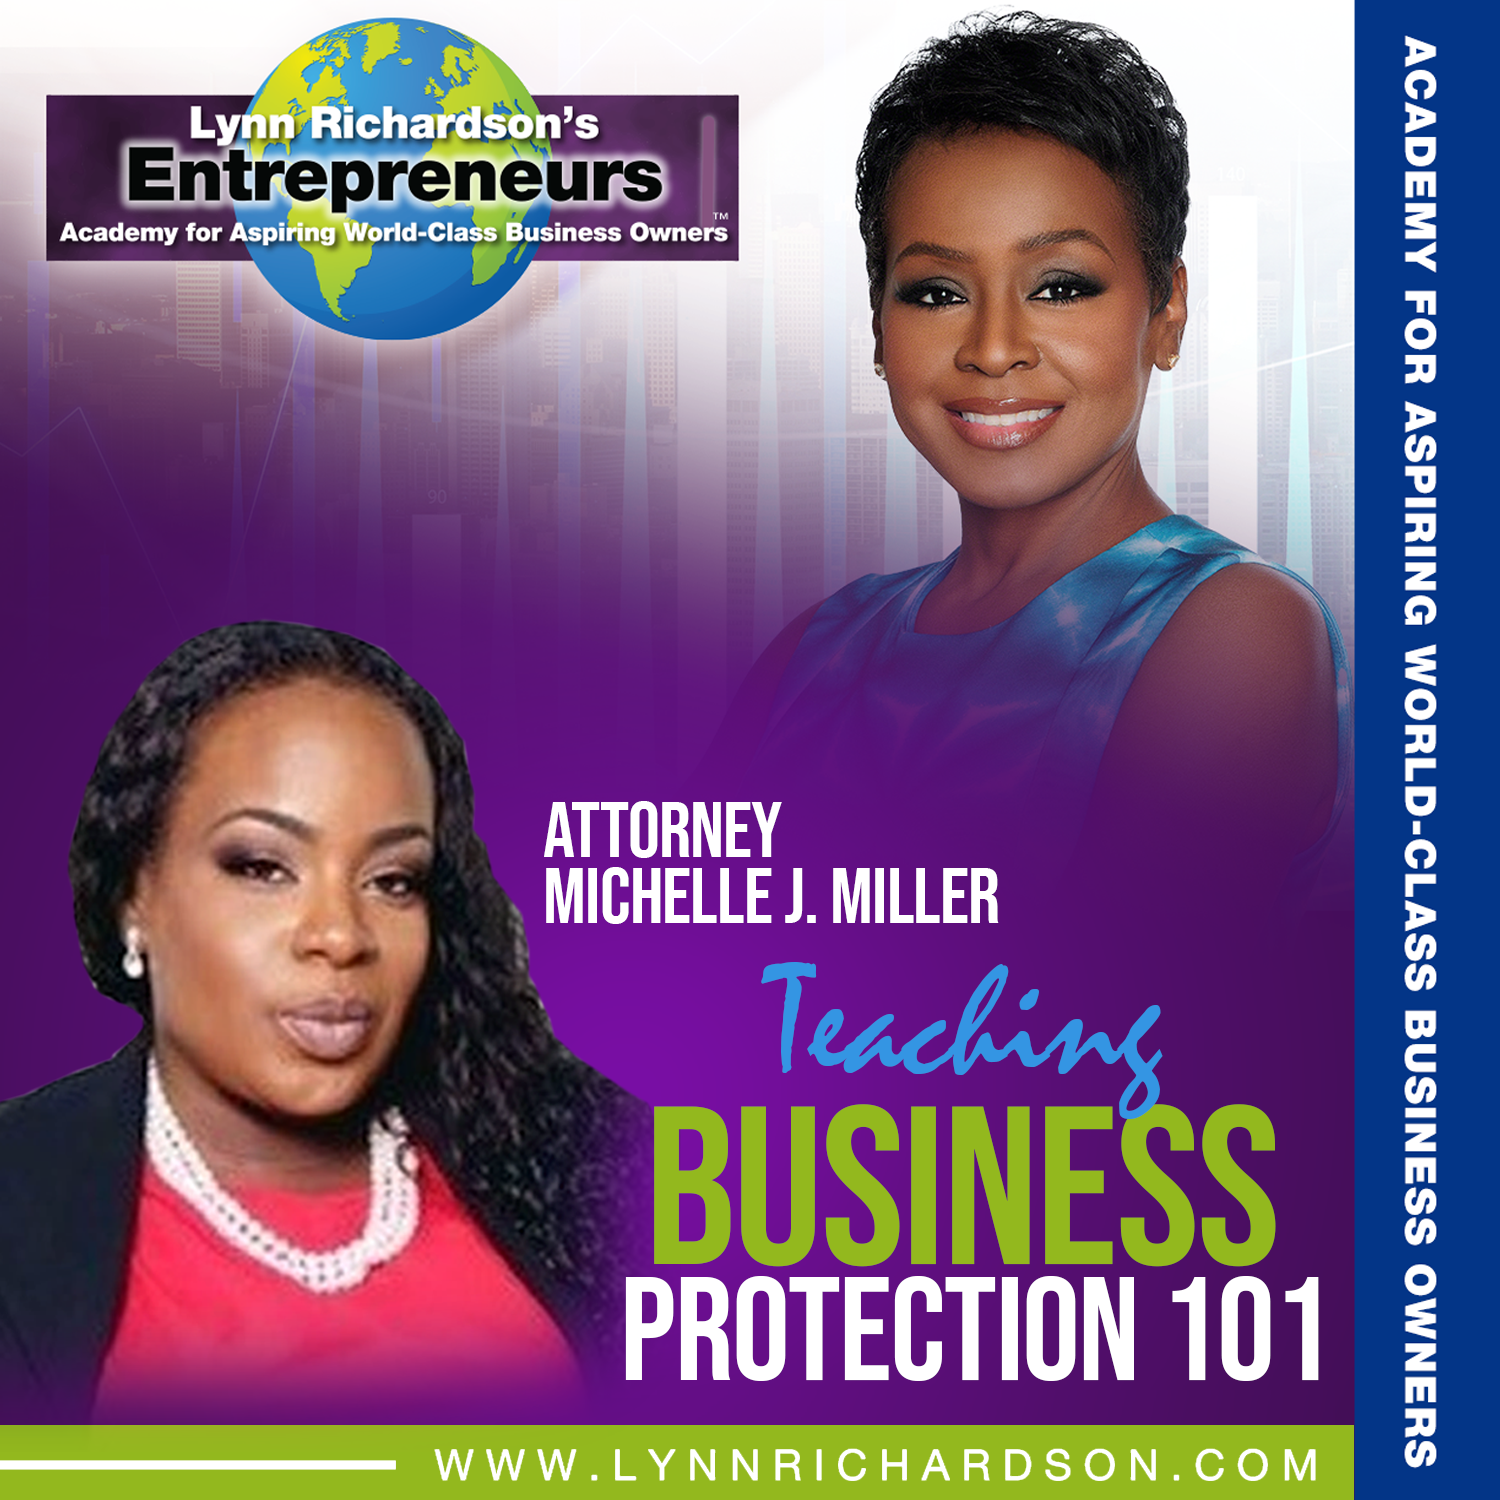 BUSINESS PROTECTION 101: HOW TO START A CORPORATION OR LLC AND PROTECT YOUR BRAND